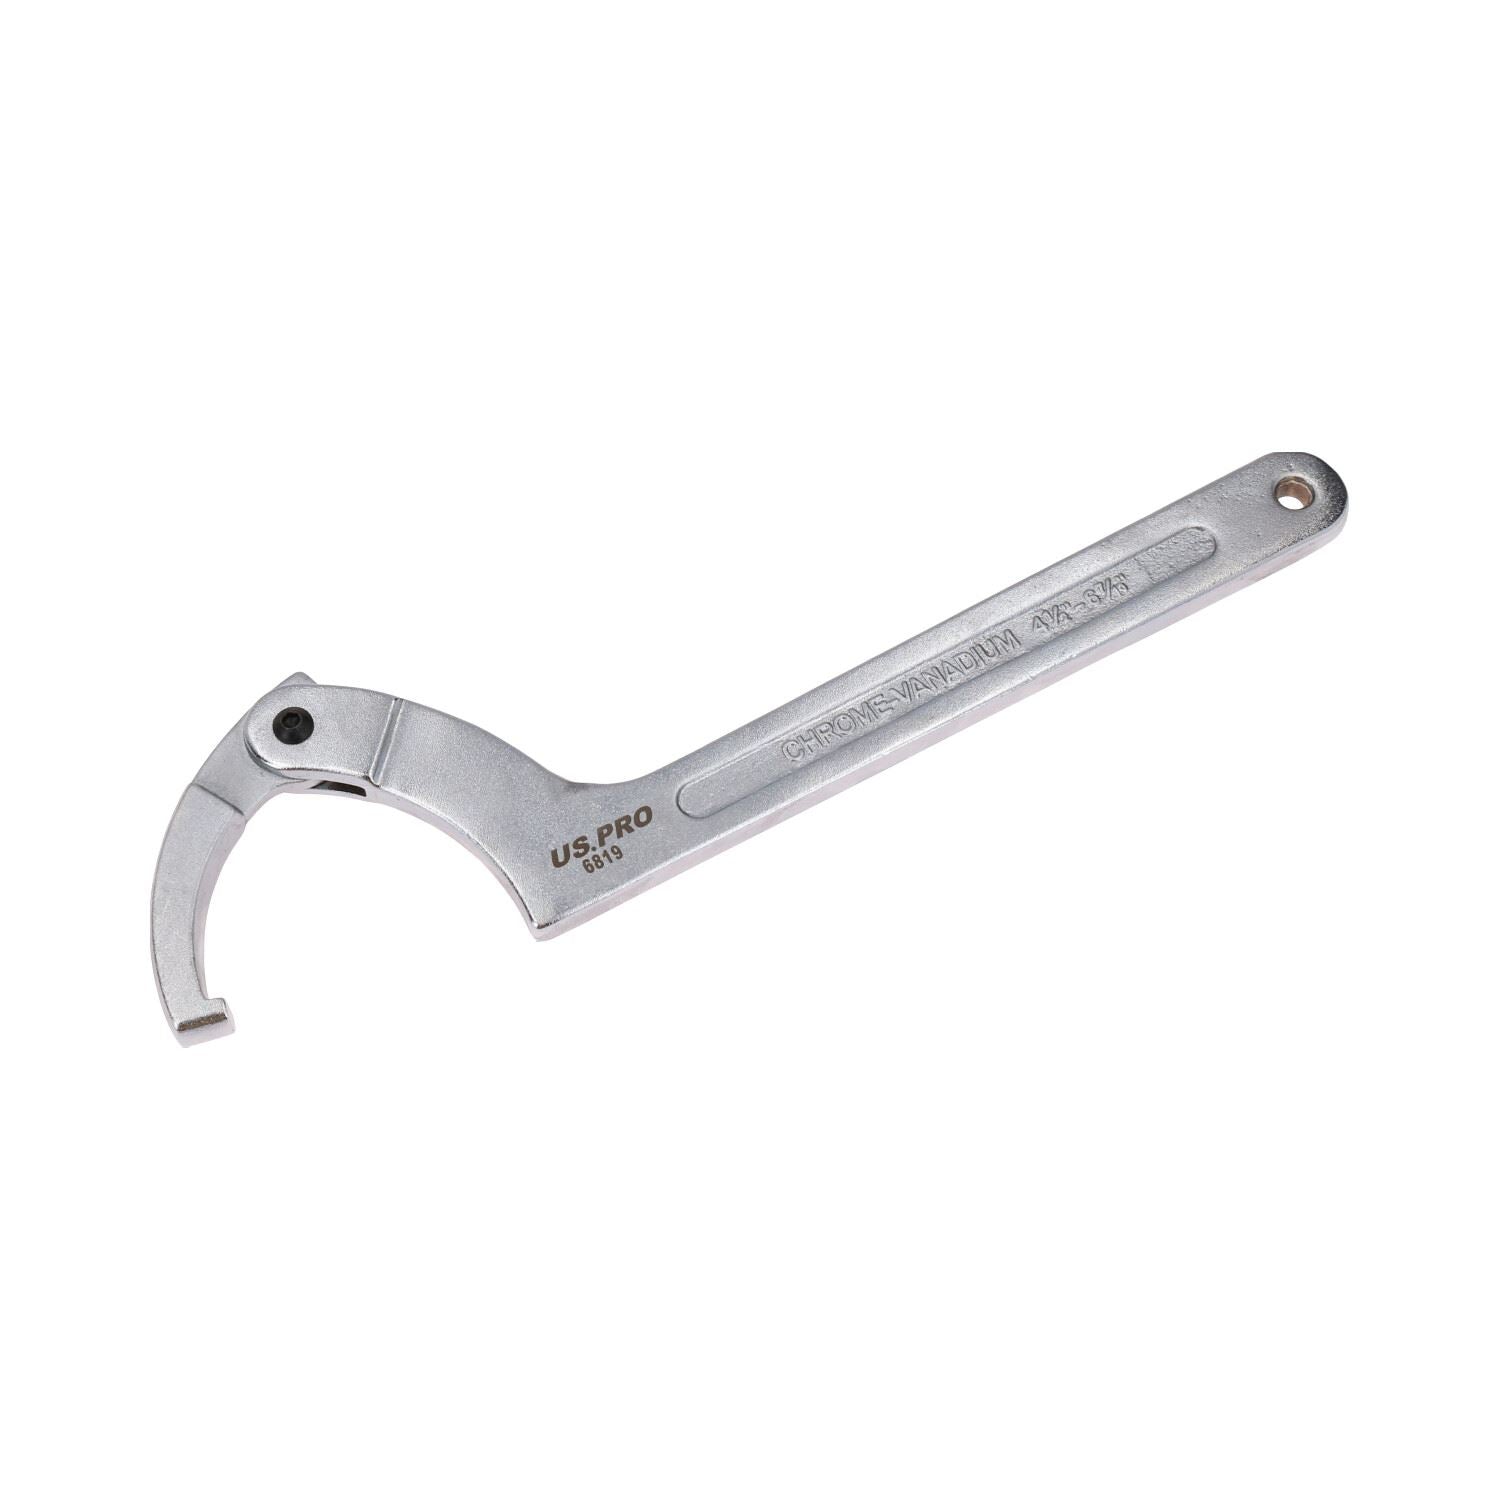 Adjustable Hook Wrench C Spanner 115mm – 175mm For Slotted Retaining Rings